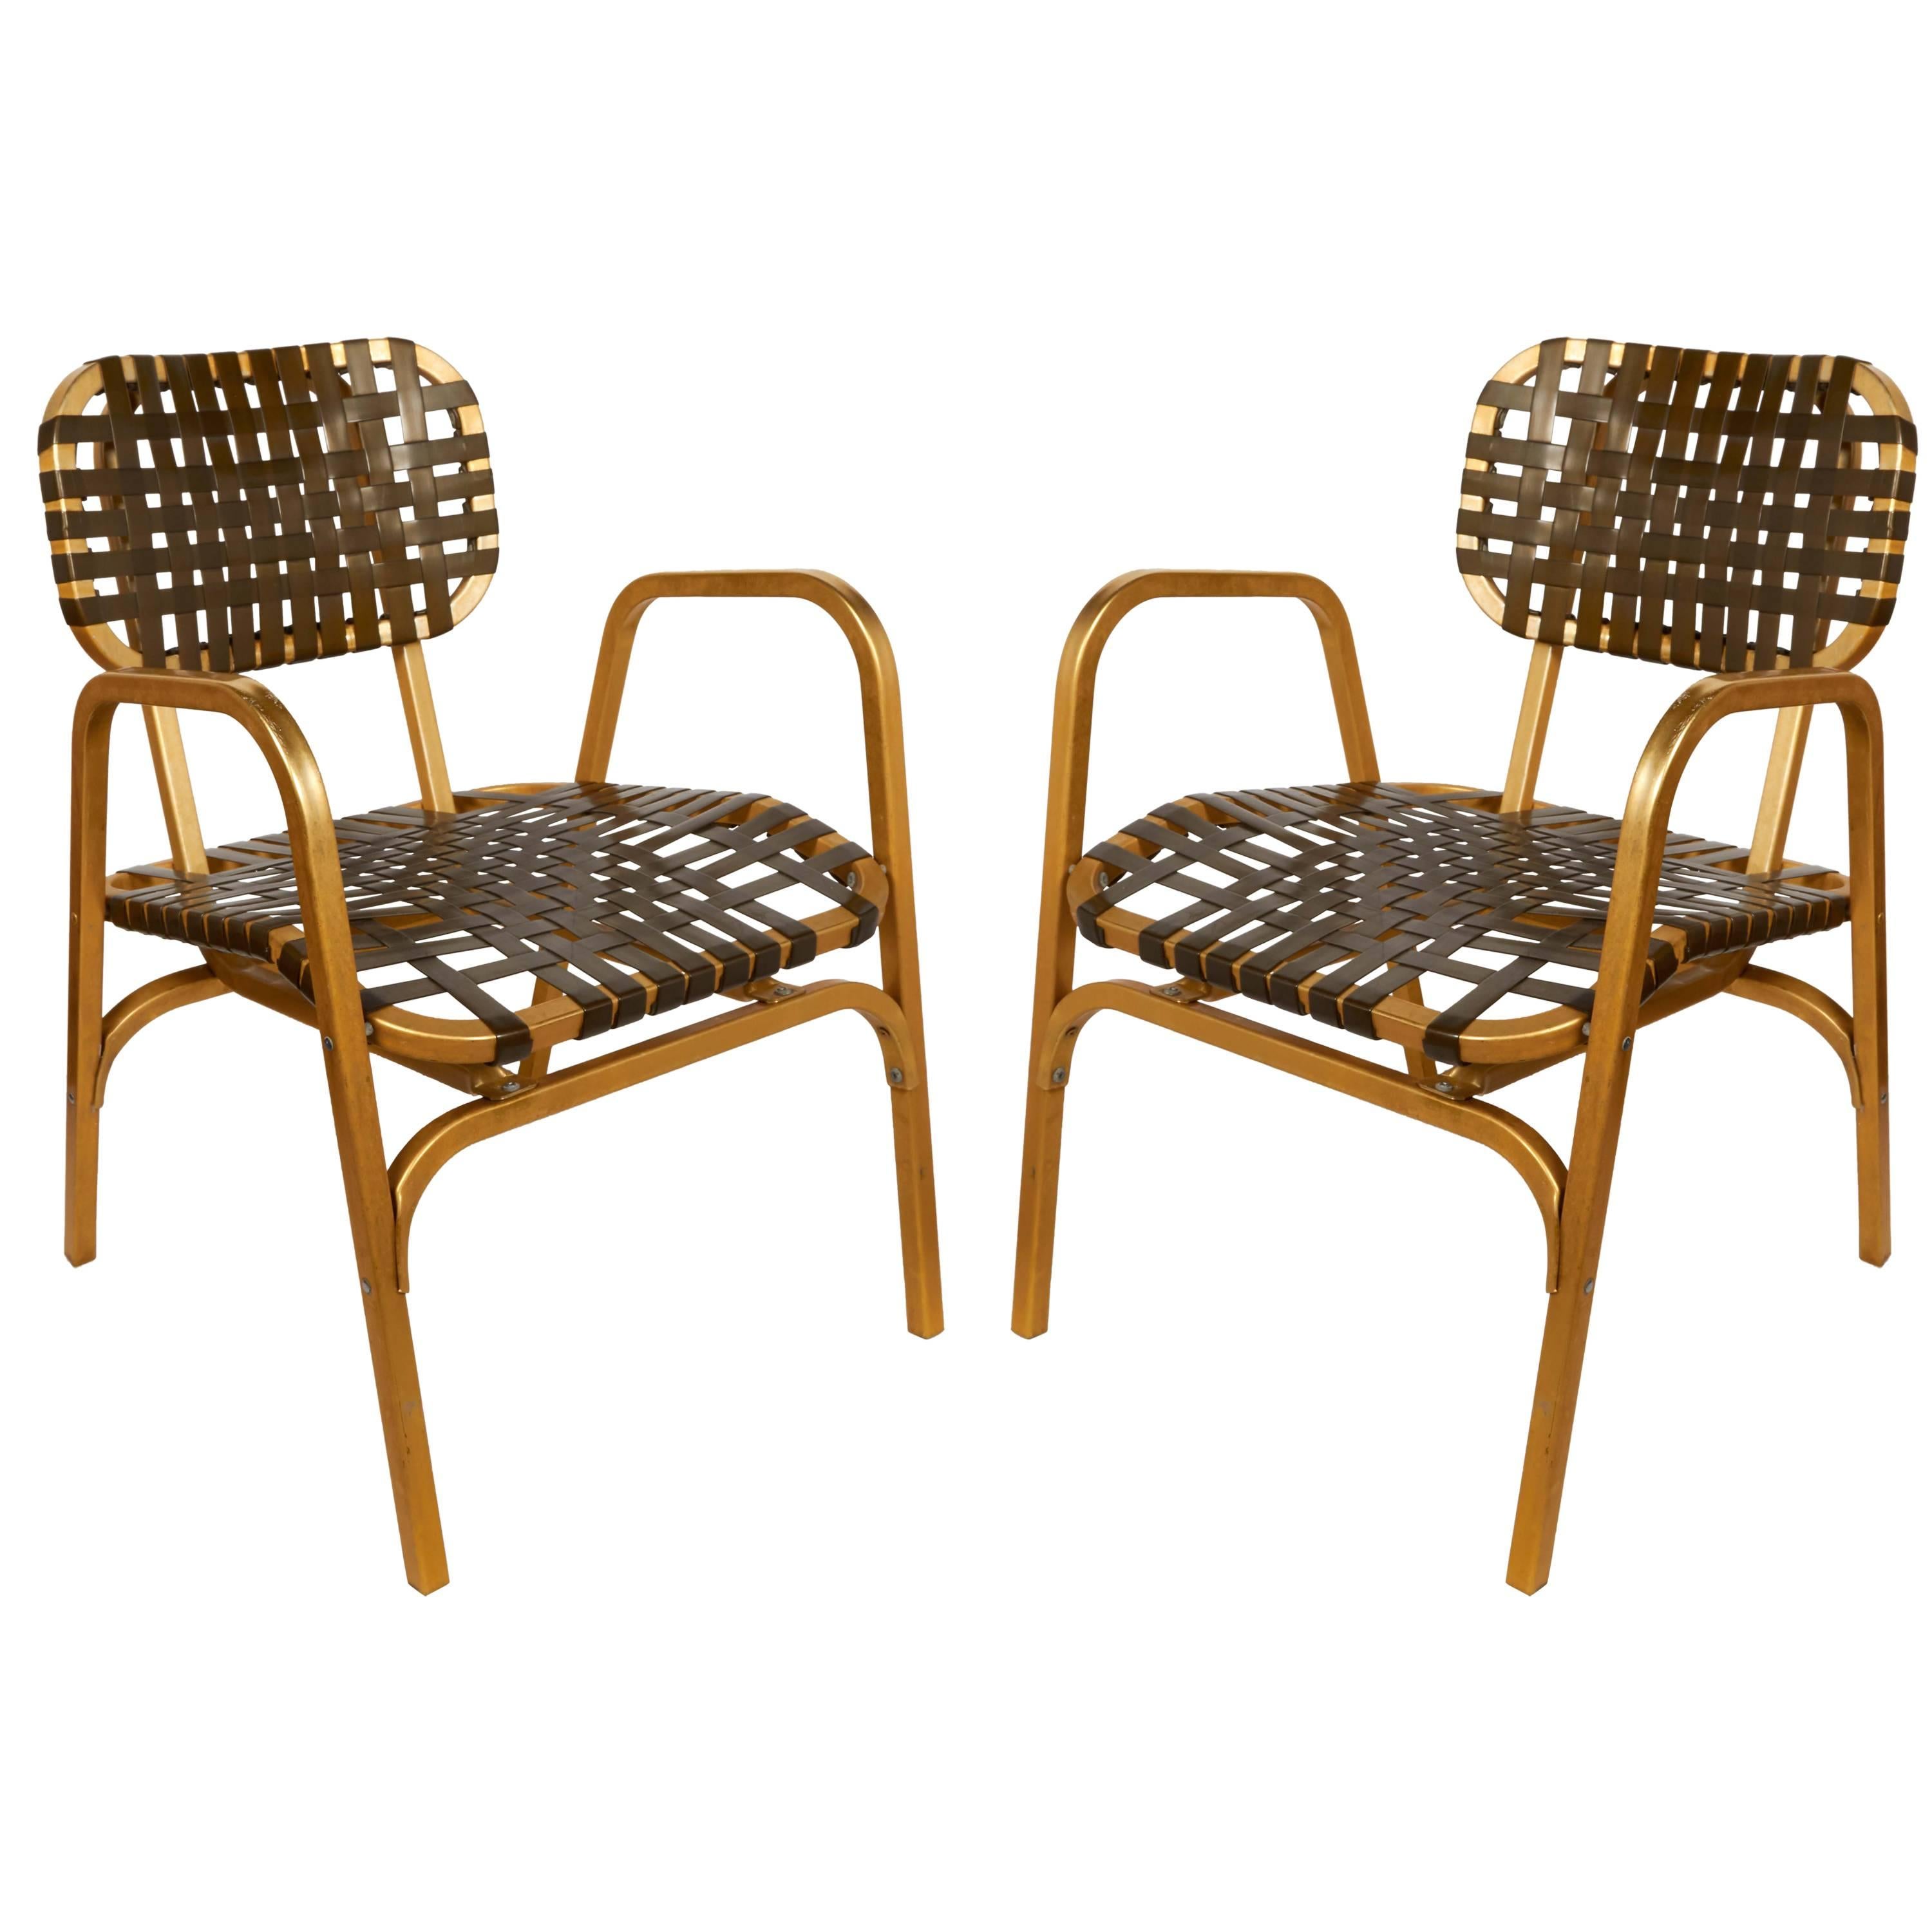 Pair of 1950's Mid-Century Modern Leisure Garden or Patio Chairs